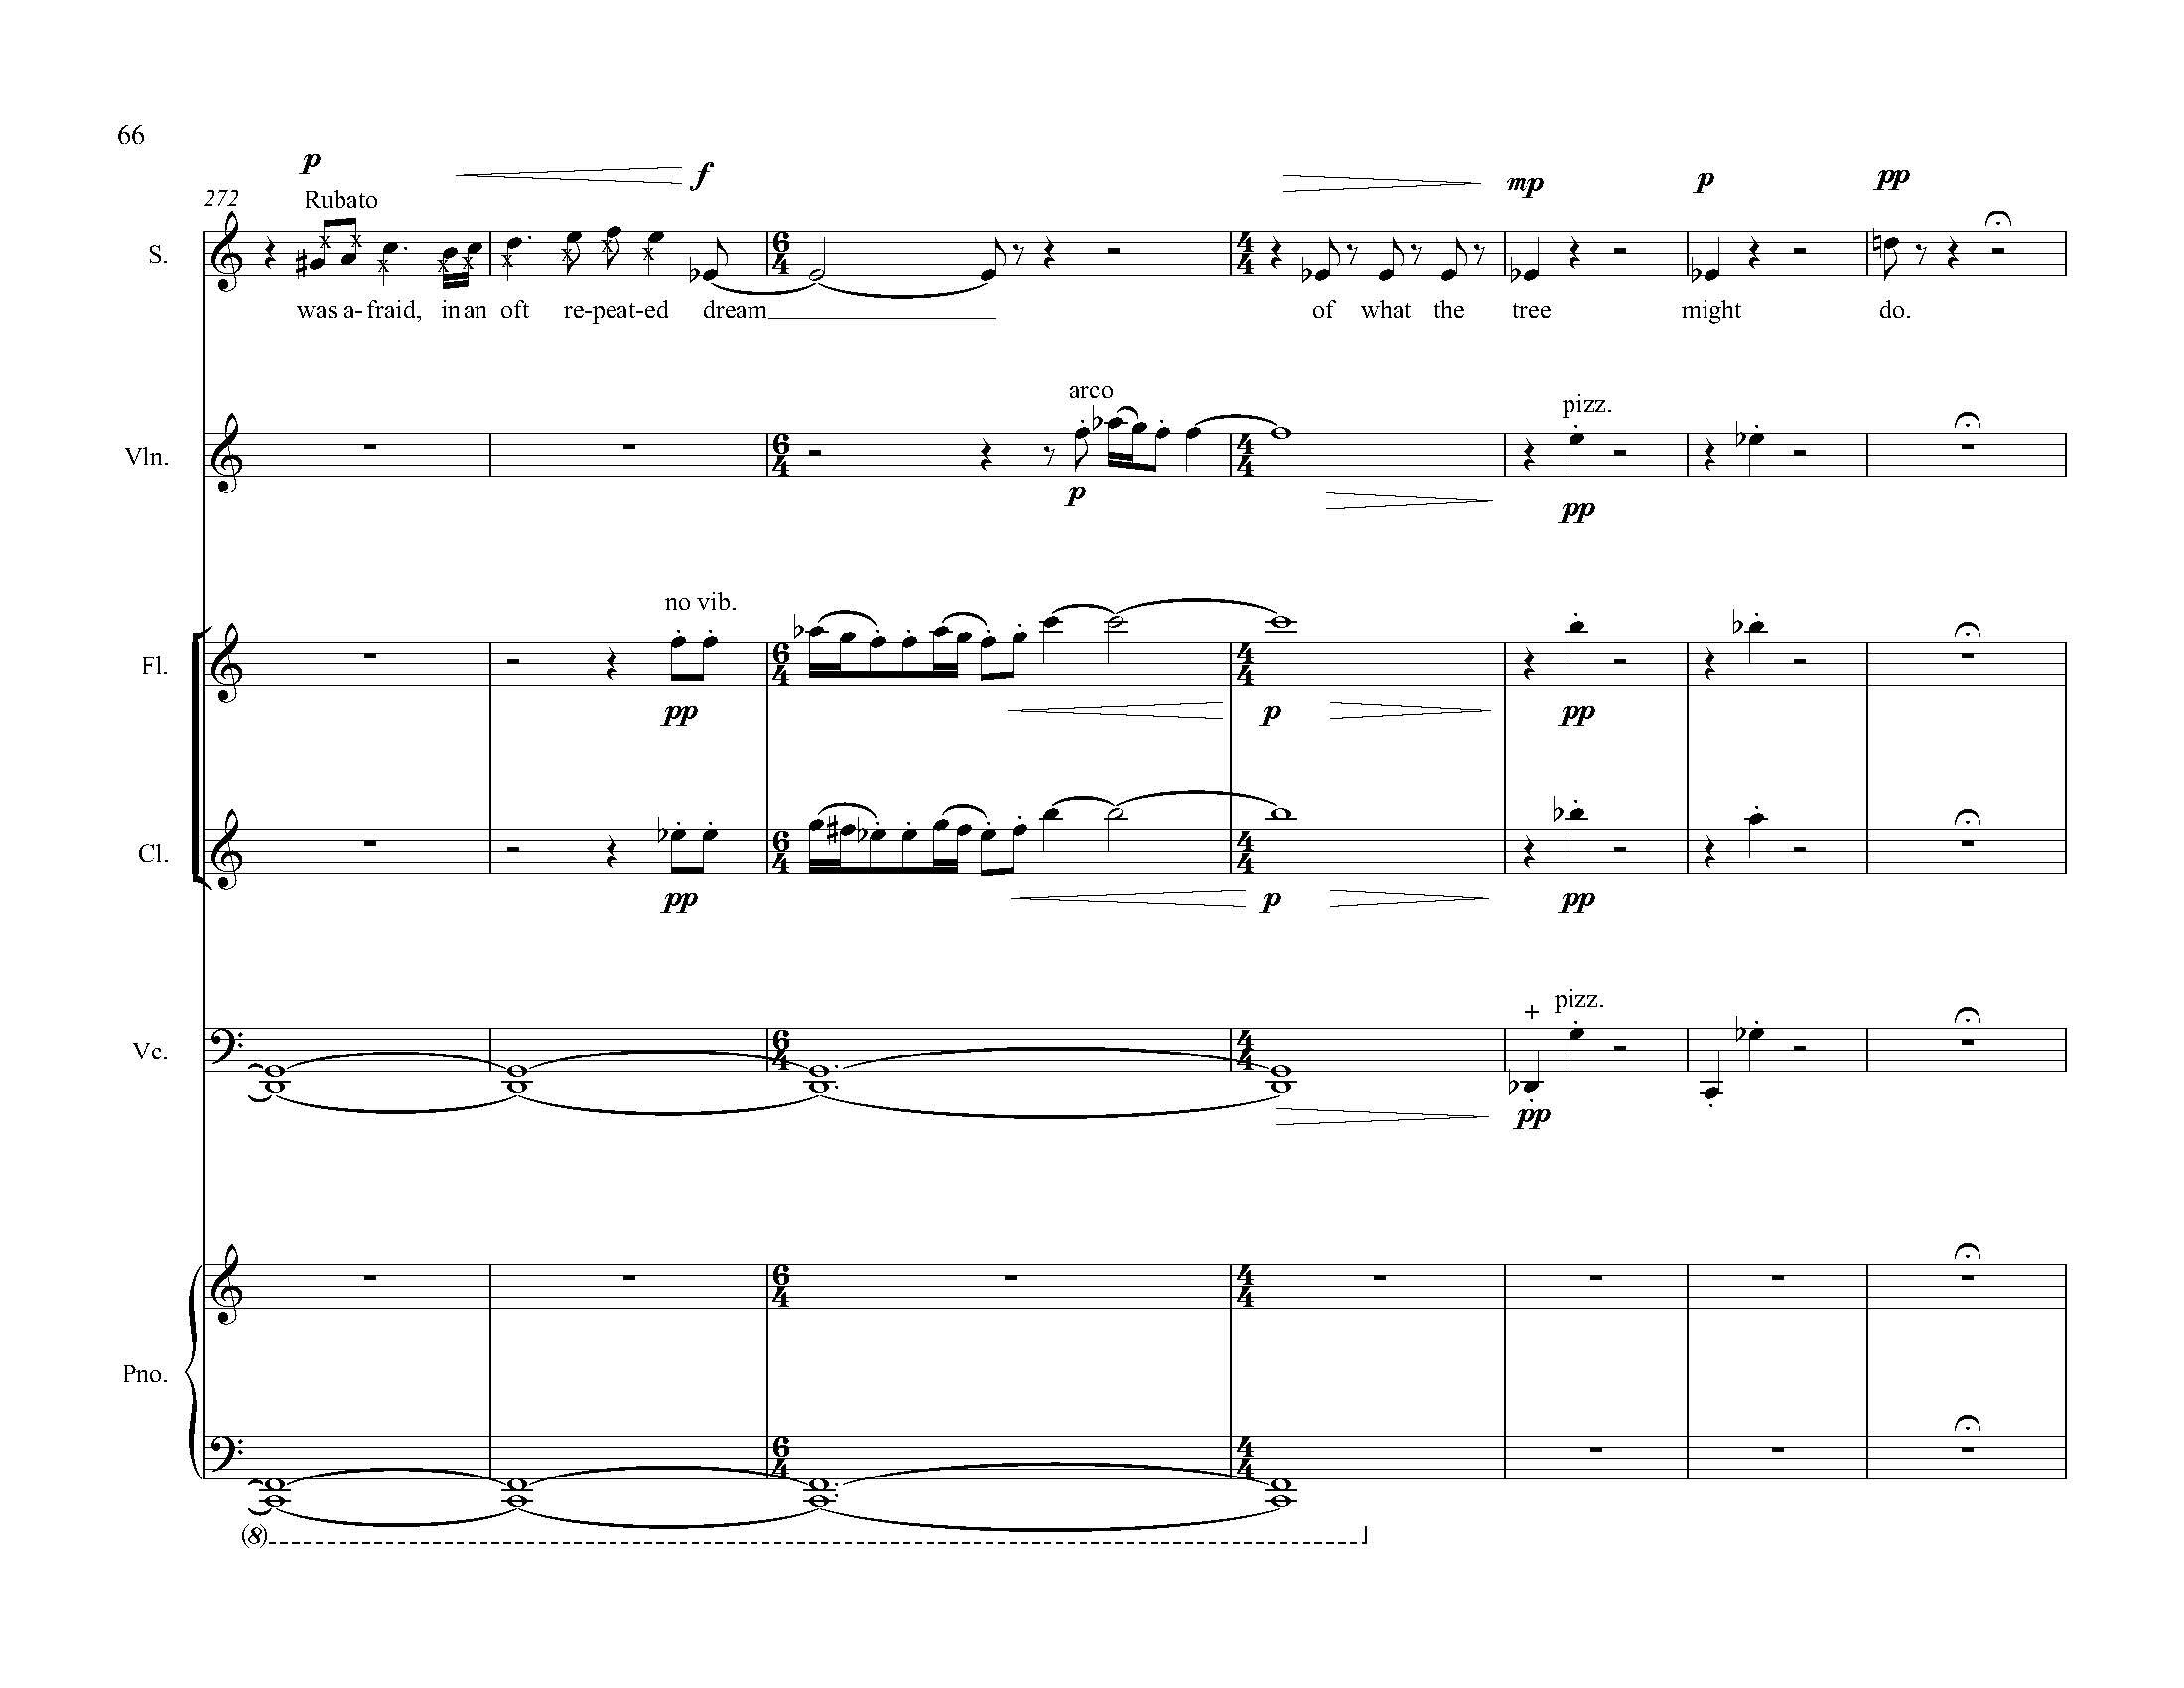 The Hill Wife - Complete Score_Page_074.jpg